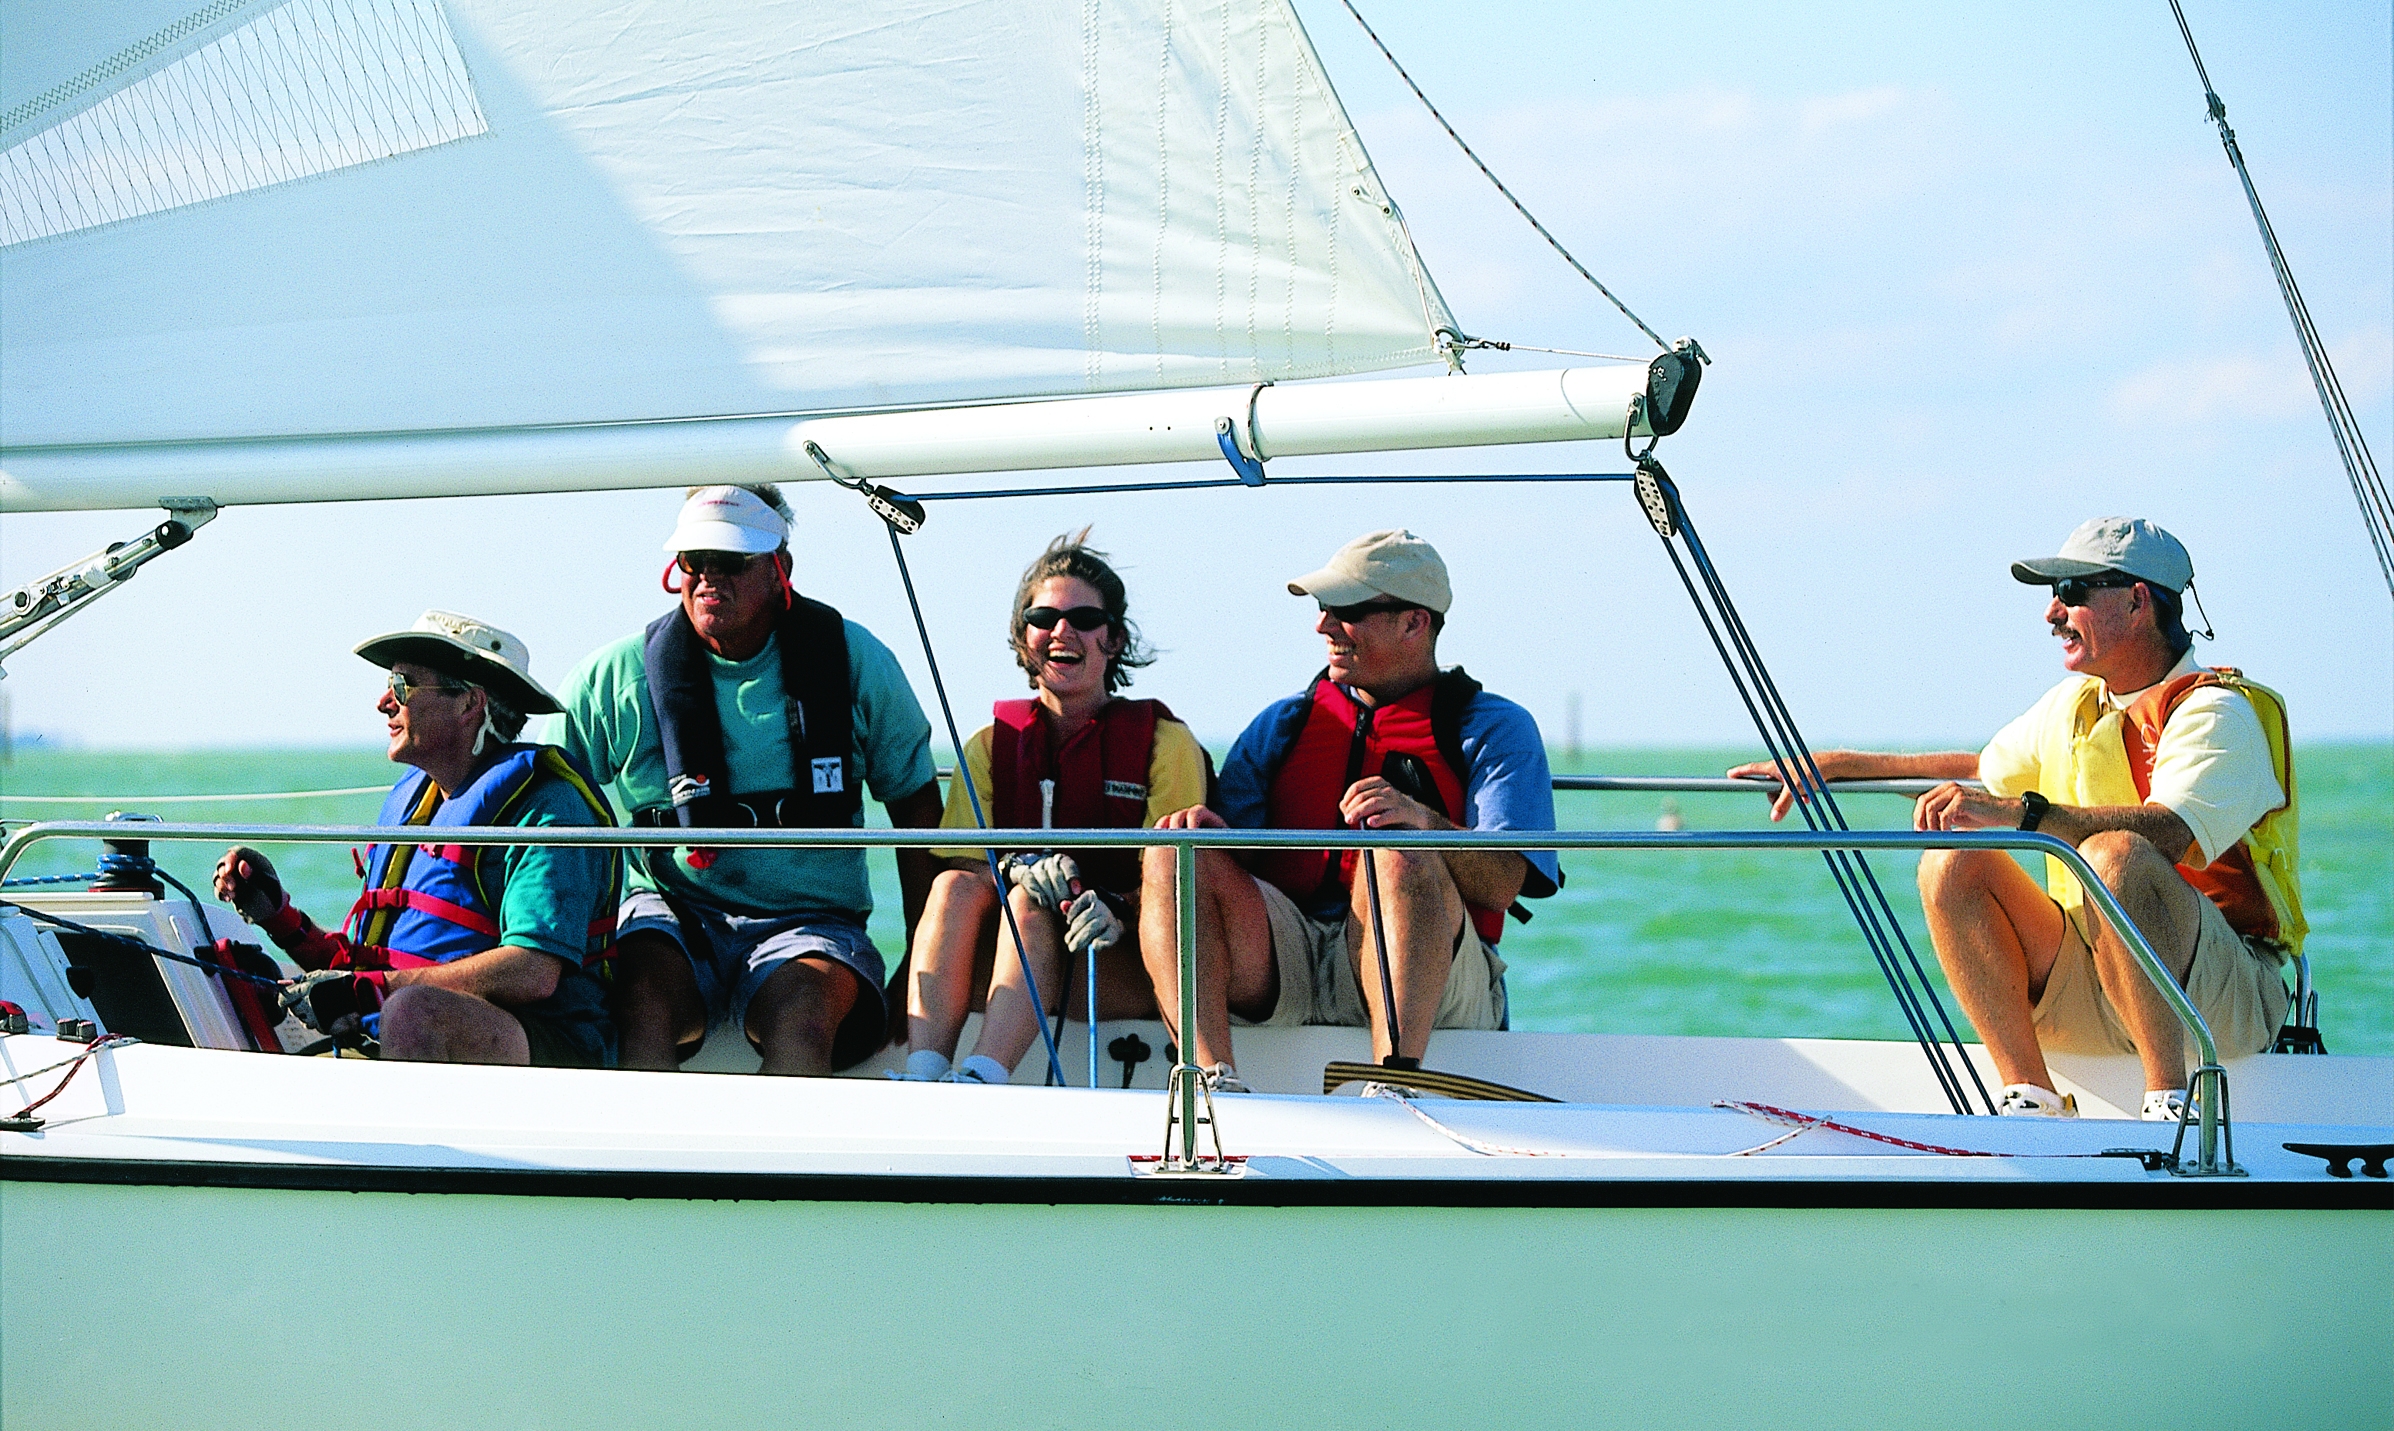 Learn to sail or race at Offshore! Image